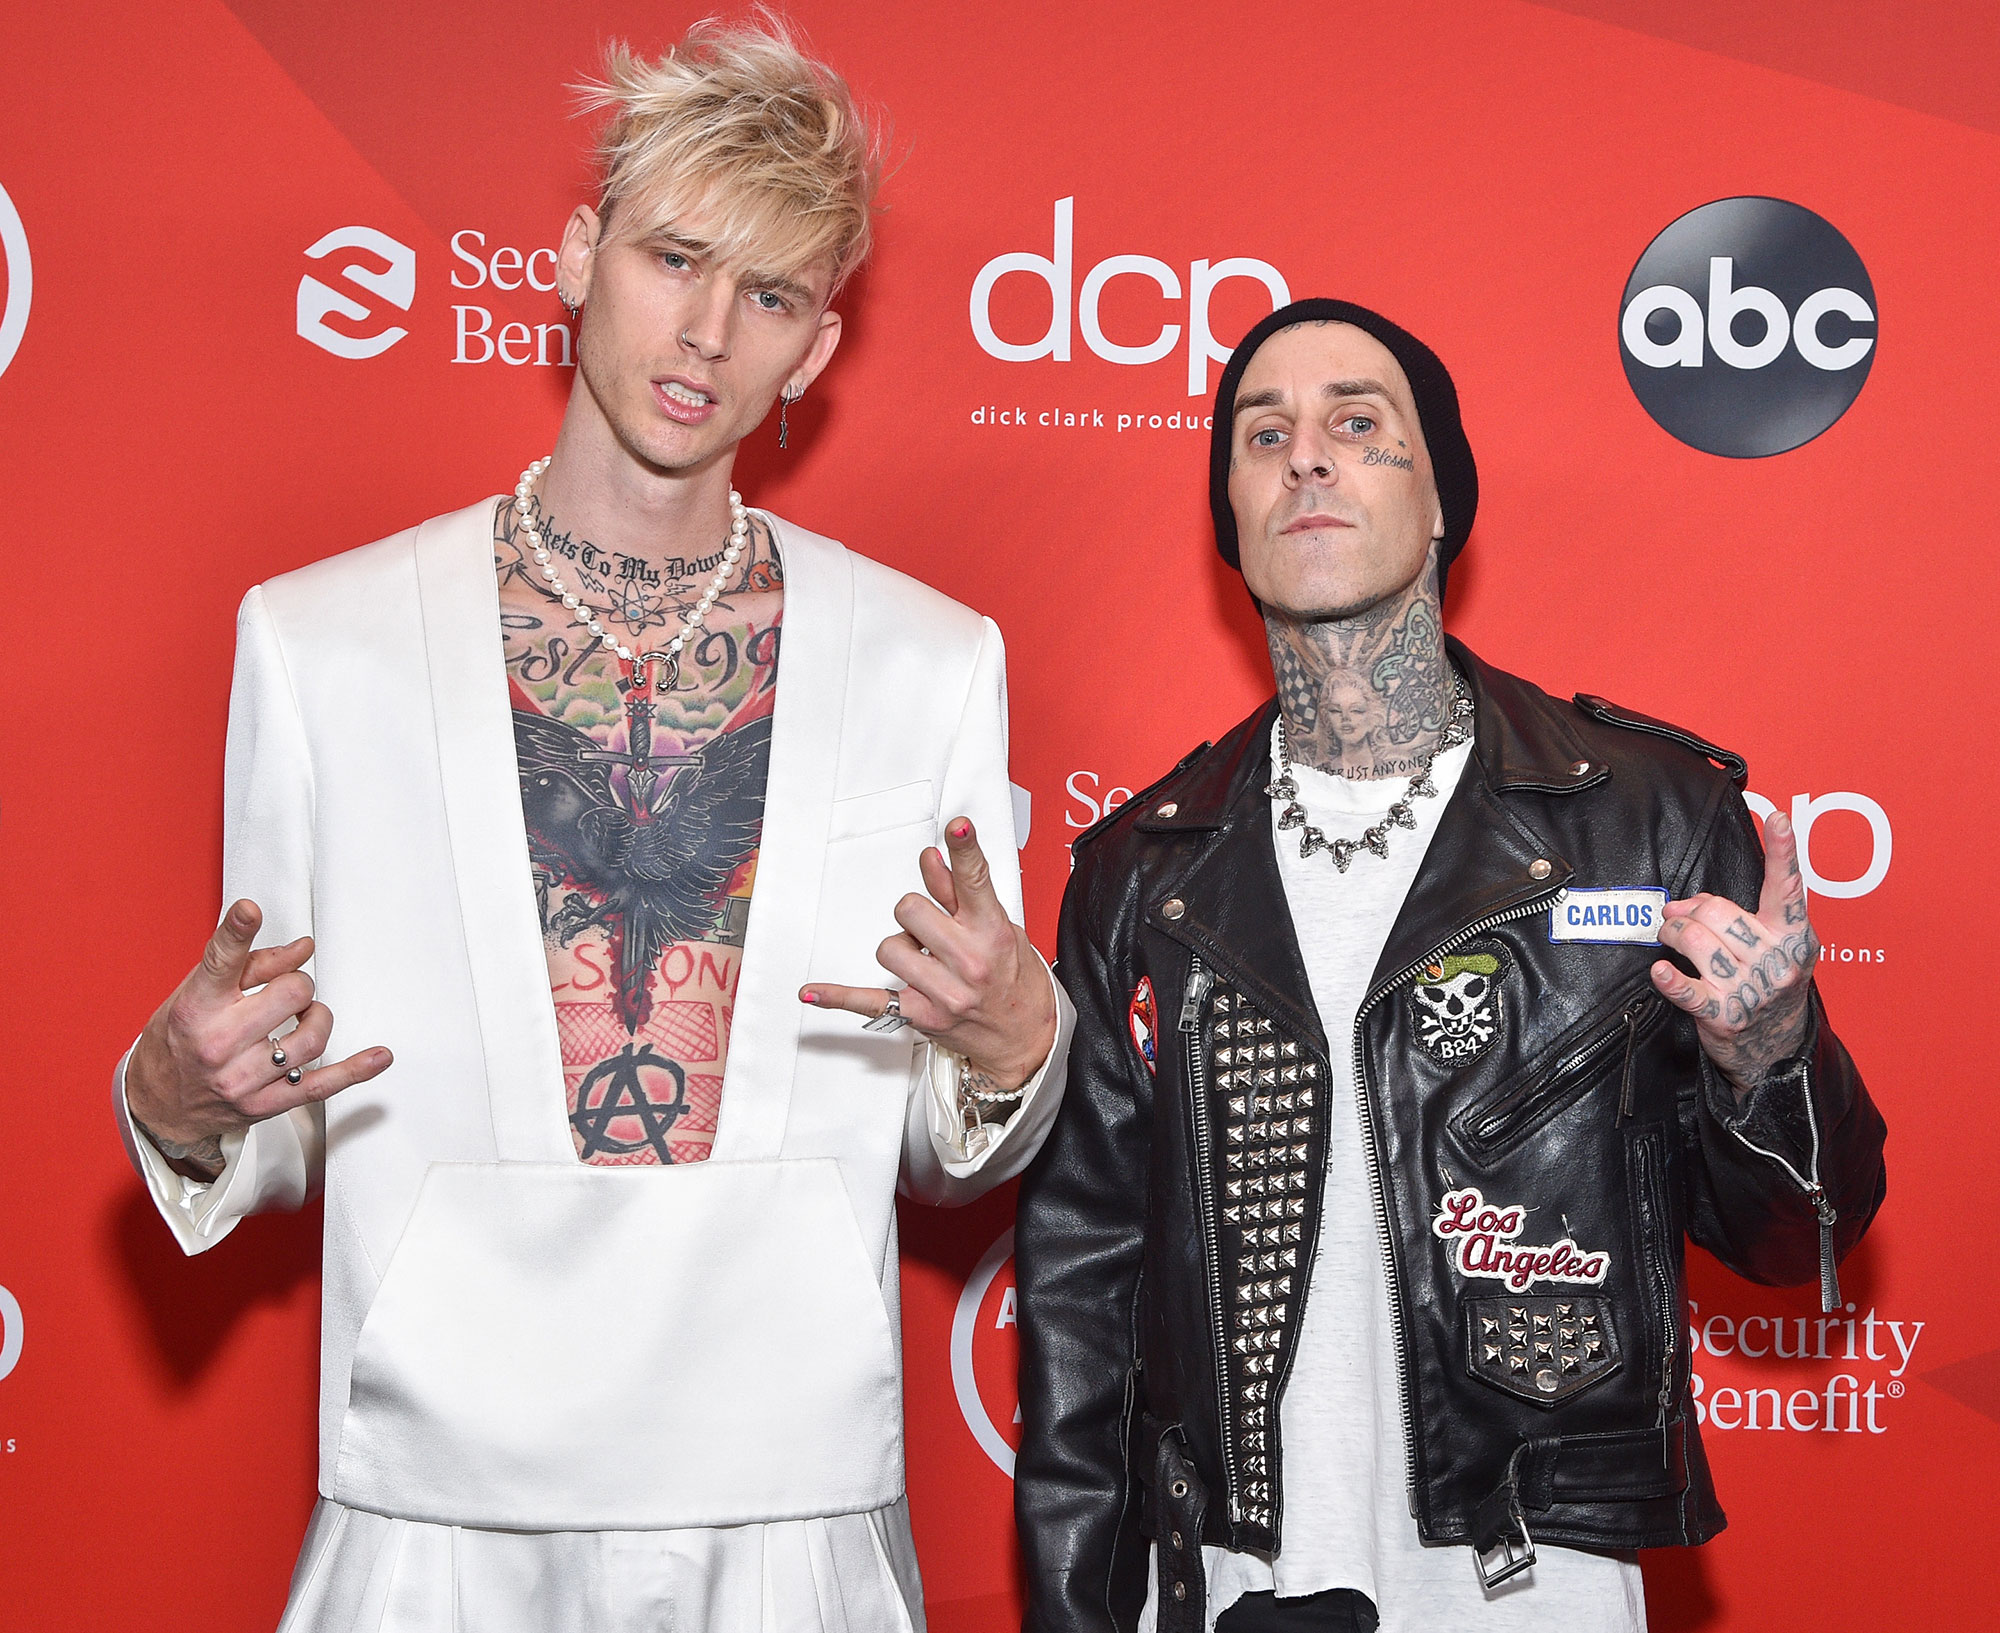 Machine Gun Kelly  the AC broke  interview with tingslondon out side  note  im covering some of these tattoos on to the new    justinrcampbell  Facebook